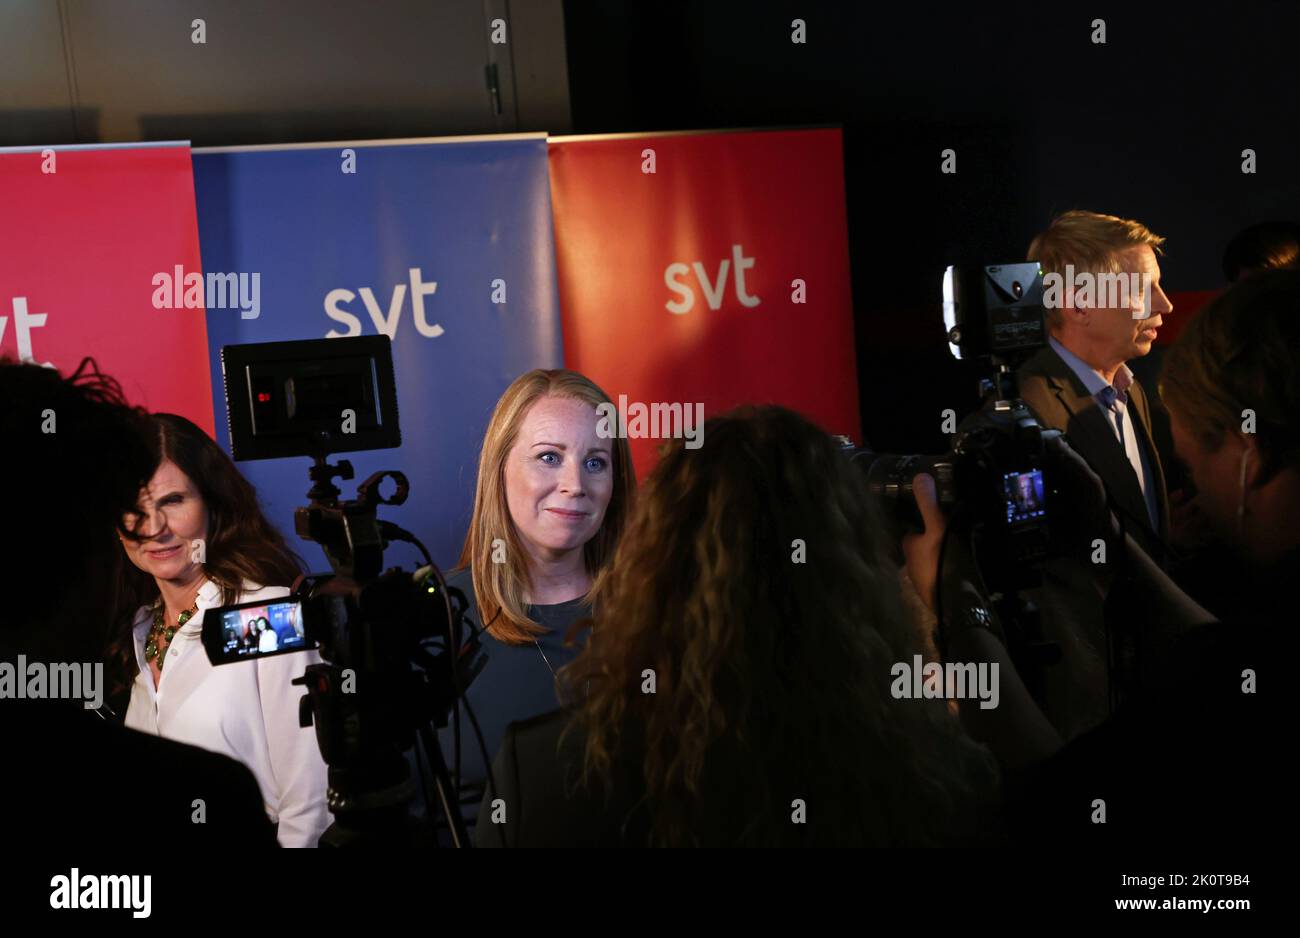 The Swedish parliamentary elections, election day, during Sunday in Stockholm, Sweden. In the picture: Sveriges Television's broadcast during election evening. In the middle: Annie Lööf, The Centre Party (In swedish: centerpartiet). To the left Märta Stenevi and to the right Per Bolund, The Green Party (Swedish: Miljöpartiet de gröna). Stock Photo